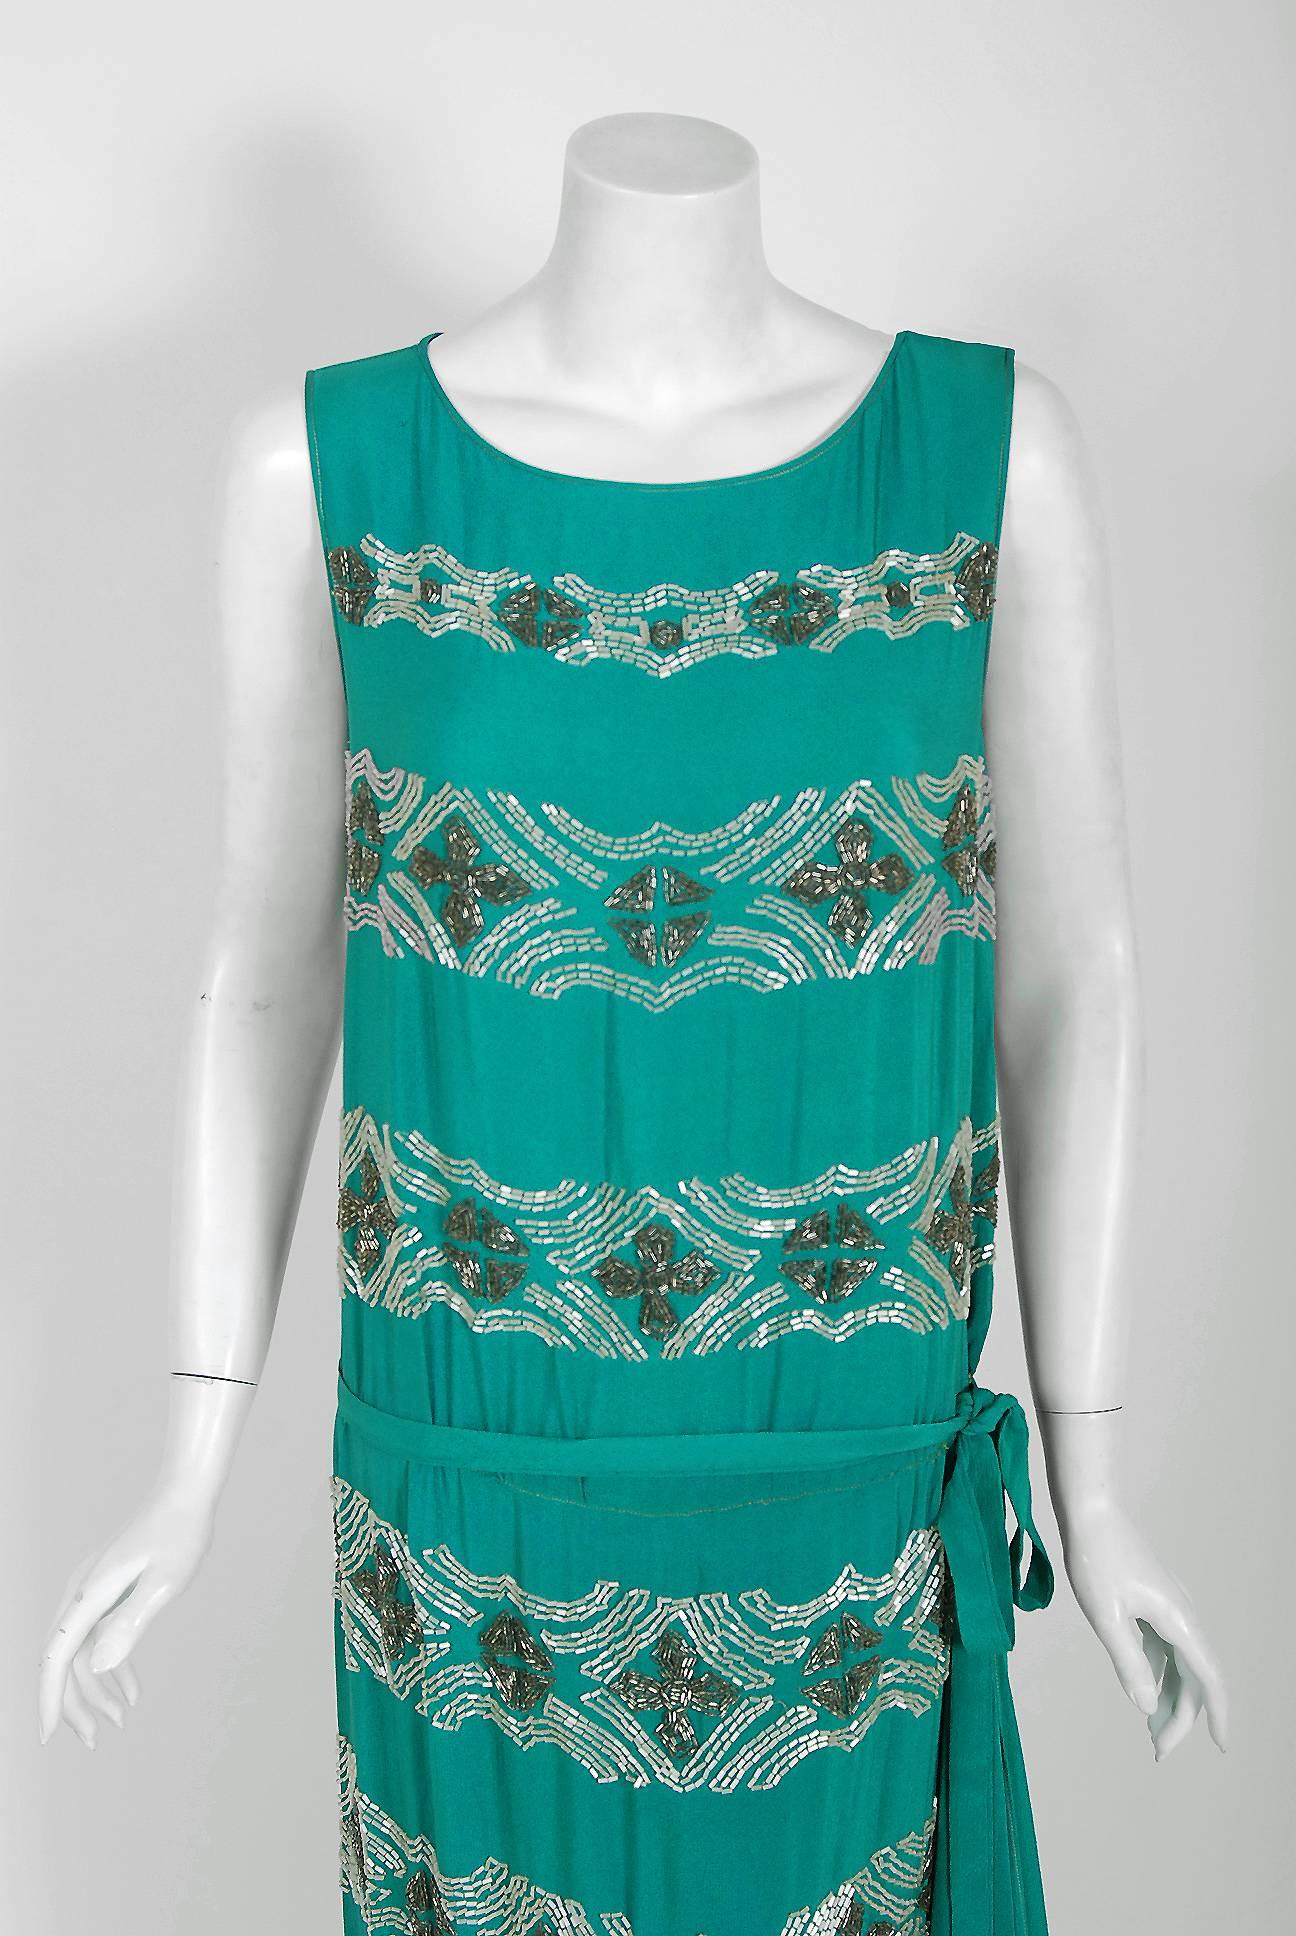 Vibrant flapper dresses from the early 20th century are perennial favorites and this one is a show-stopper. So Great Gatsby! The garment's simple unstructured style is so modern; the fine beadwork is a treasure trove of needle art. This beauty,